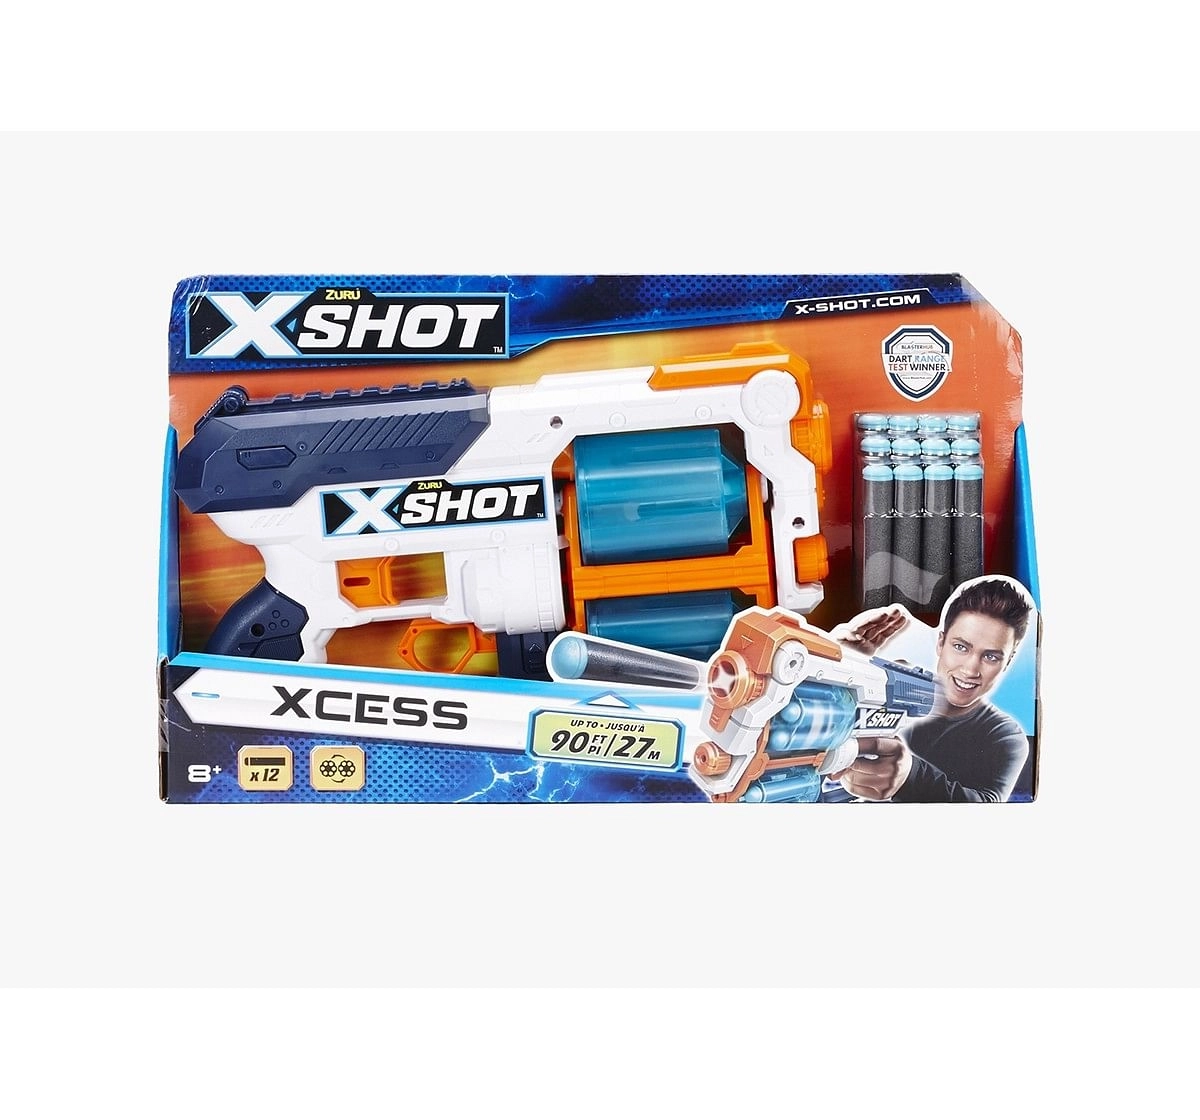 X-Shot Excel Plastic Xcess Tk 12 Blasters for Kids age 8Y+